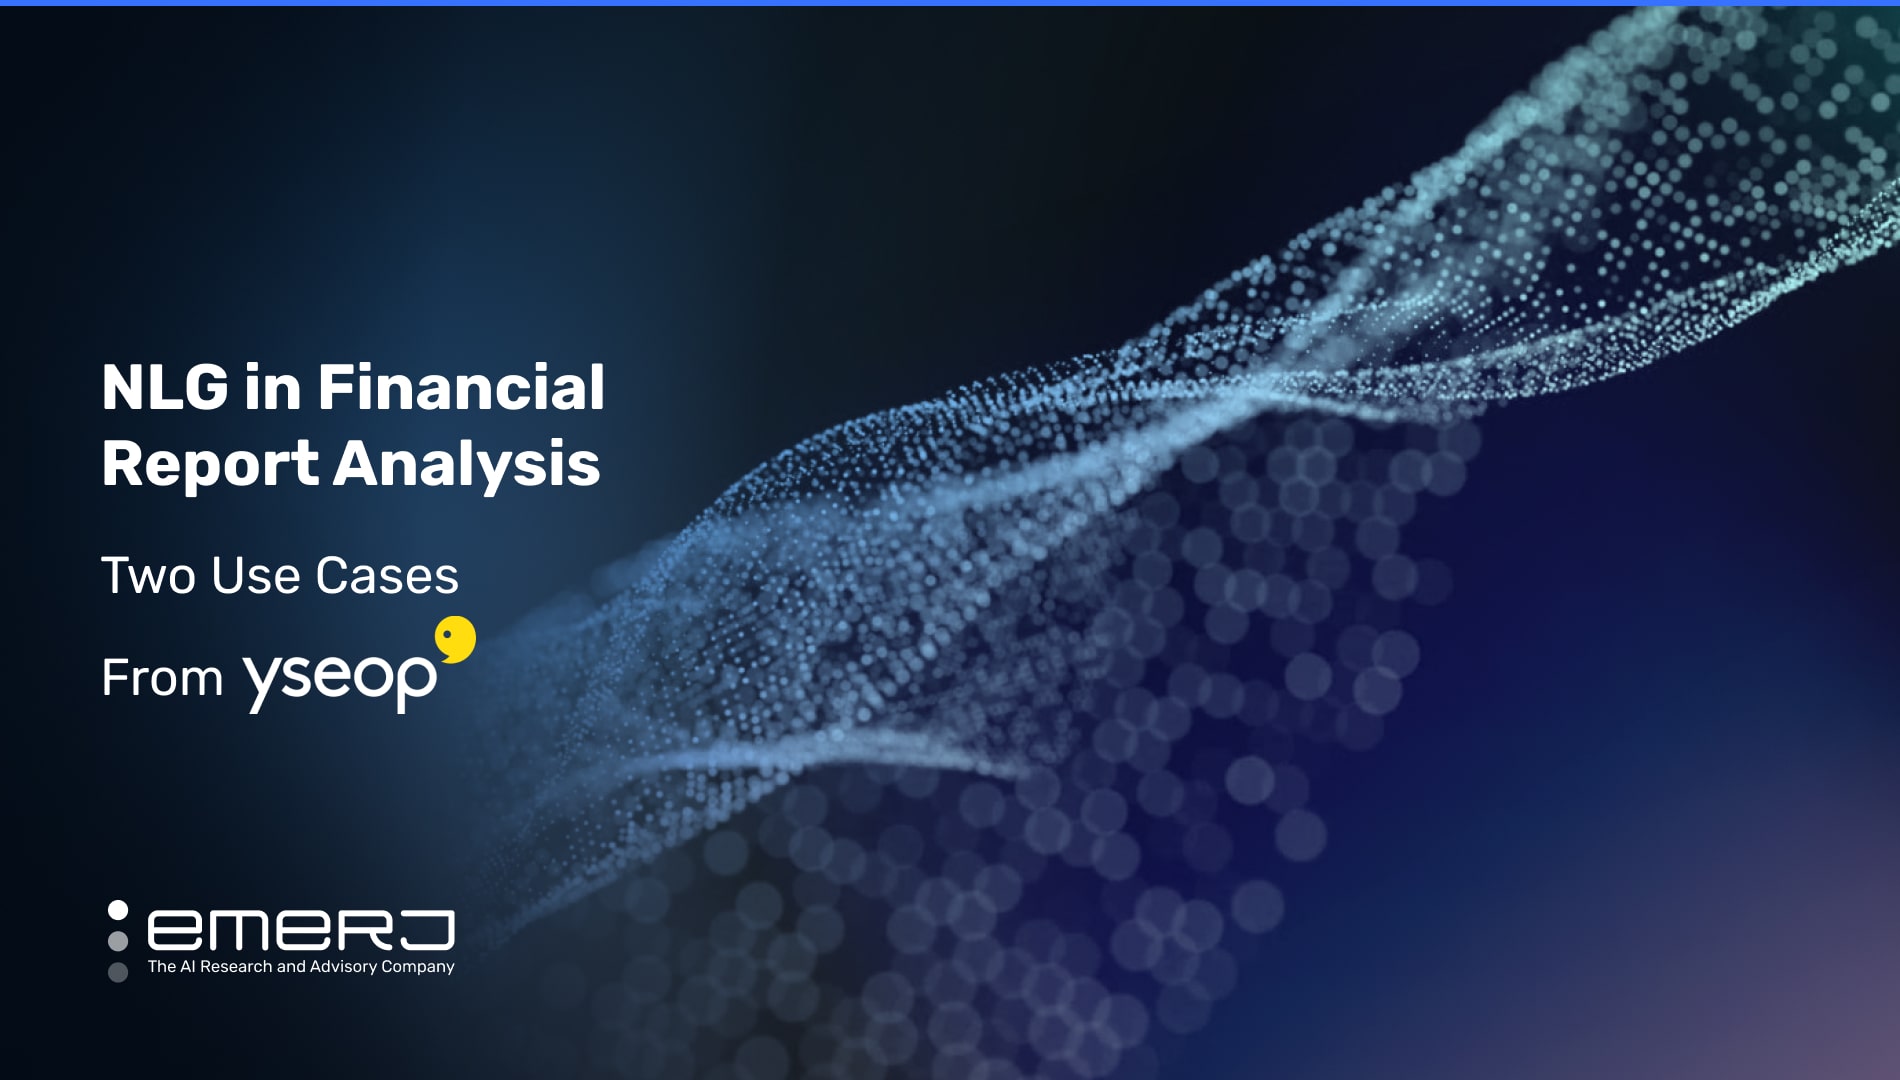 NLG in Financial Report Analysis – Two Use Cases from Yseop